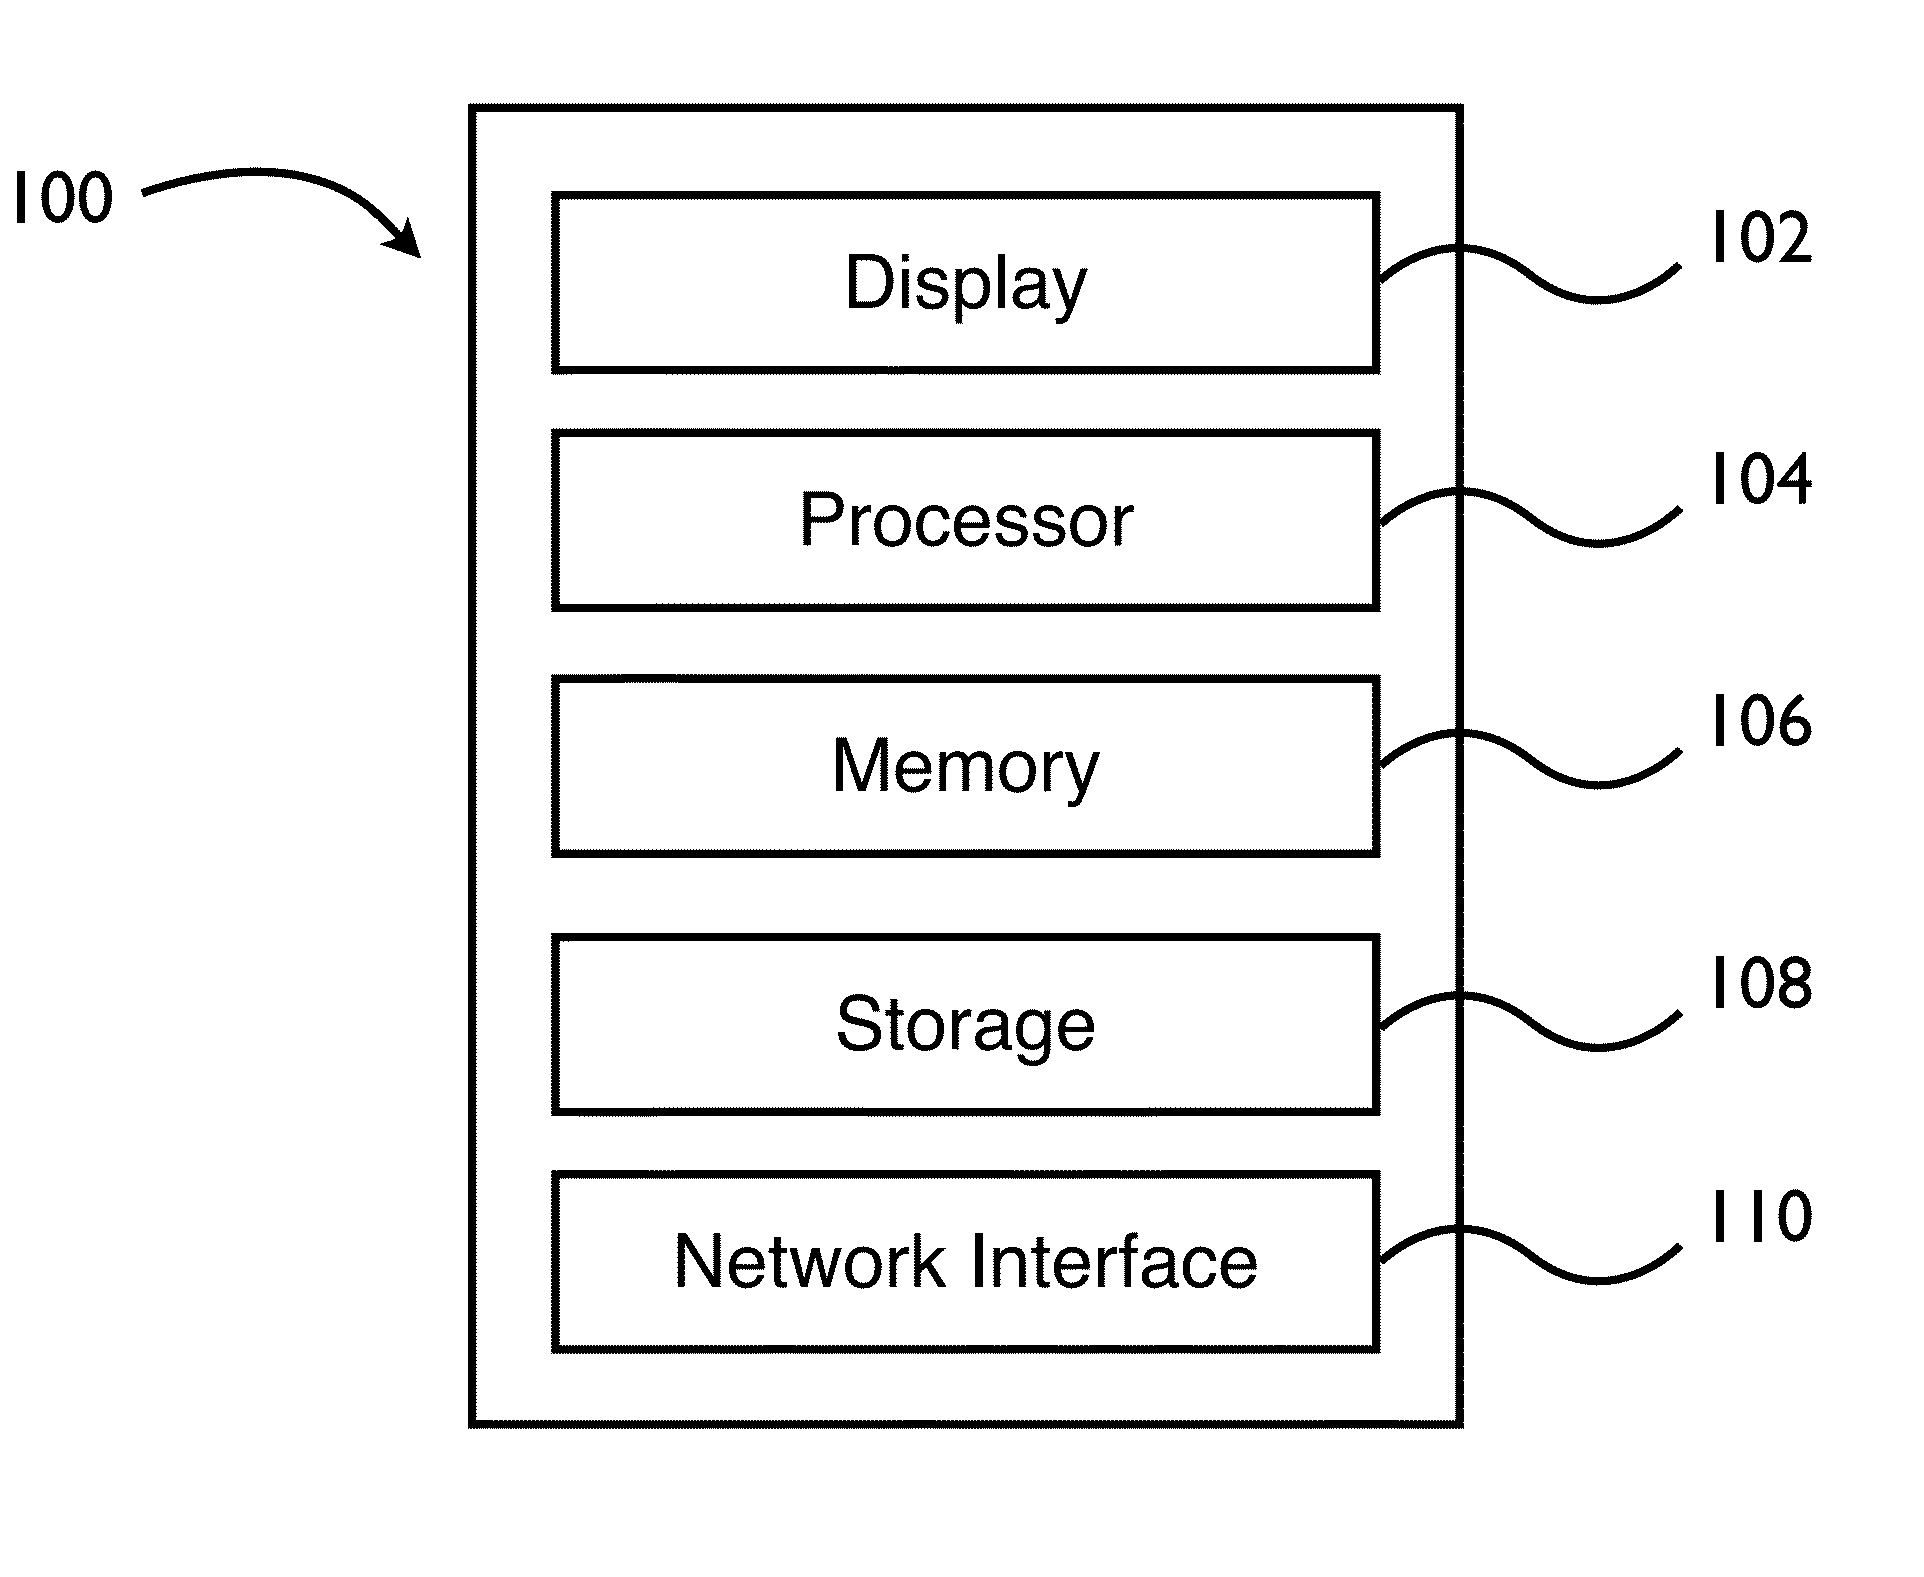 System and method for configuring, sending, receiving and displaying customized messages through customized data channels